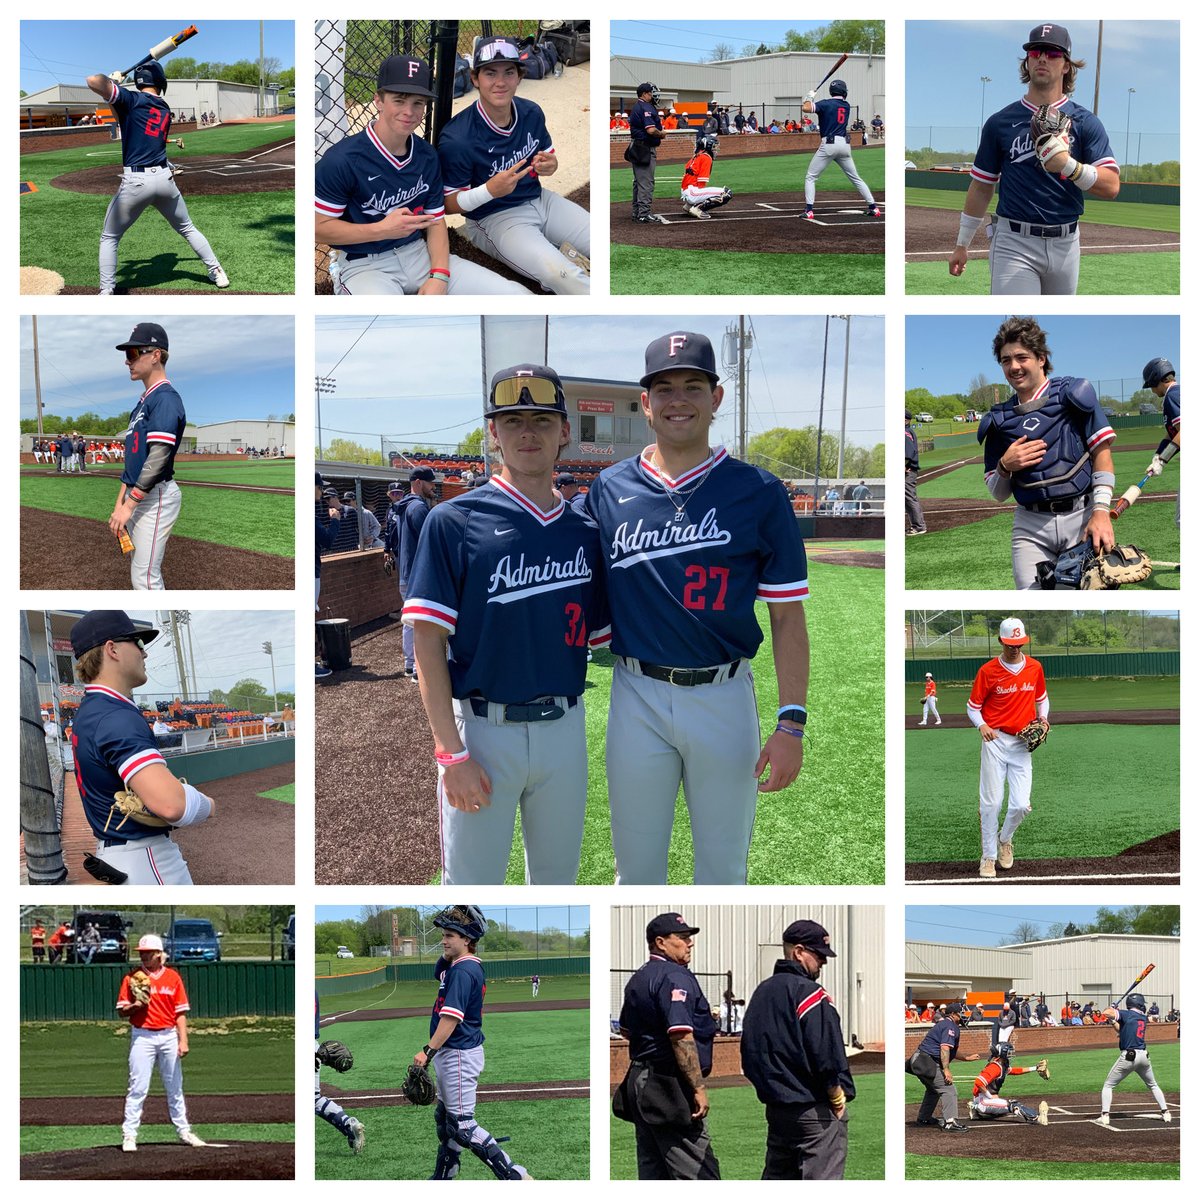 Scenes from today’s Farragut Admirals 2-0 victory over the Beech Buccaneers ⚾️⚓️😎 The Ads (24-5) have now won 20 of their last 21 games! In this weekend’s 3-game sweep in Middle Tennessee, Farragut’s pitching staff allowed only one total run ⁦@AdmiralGameday⁩